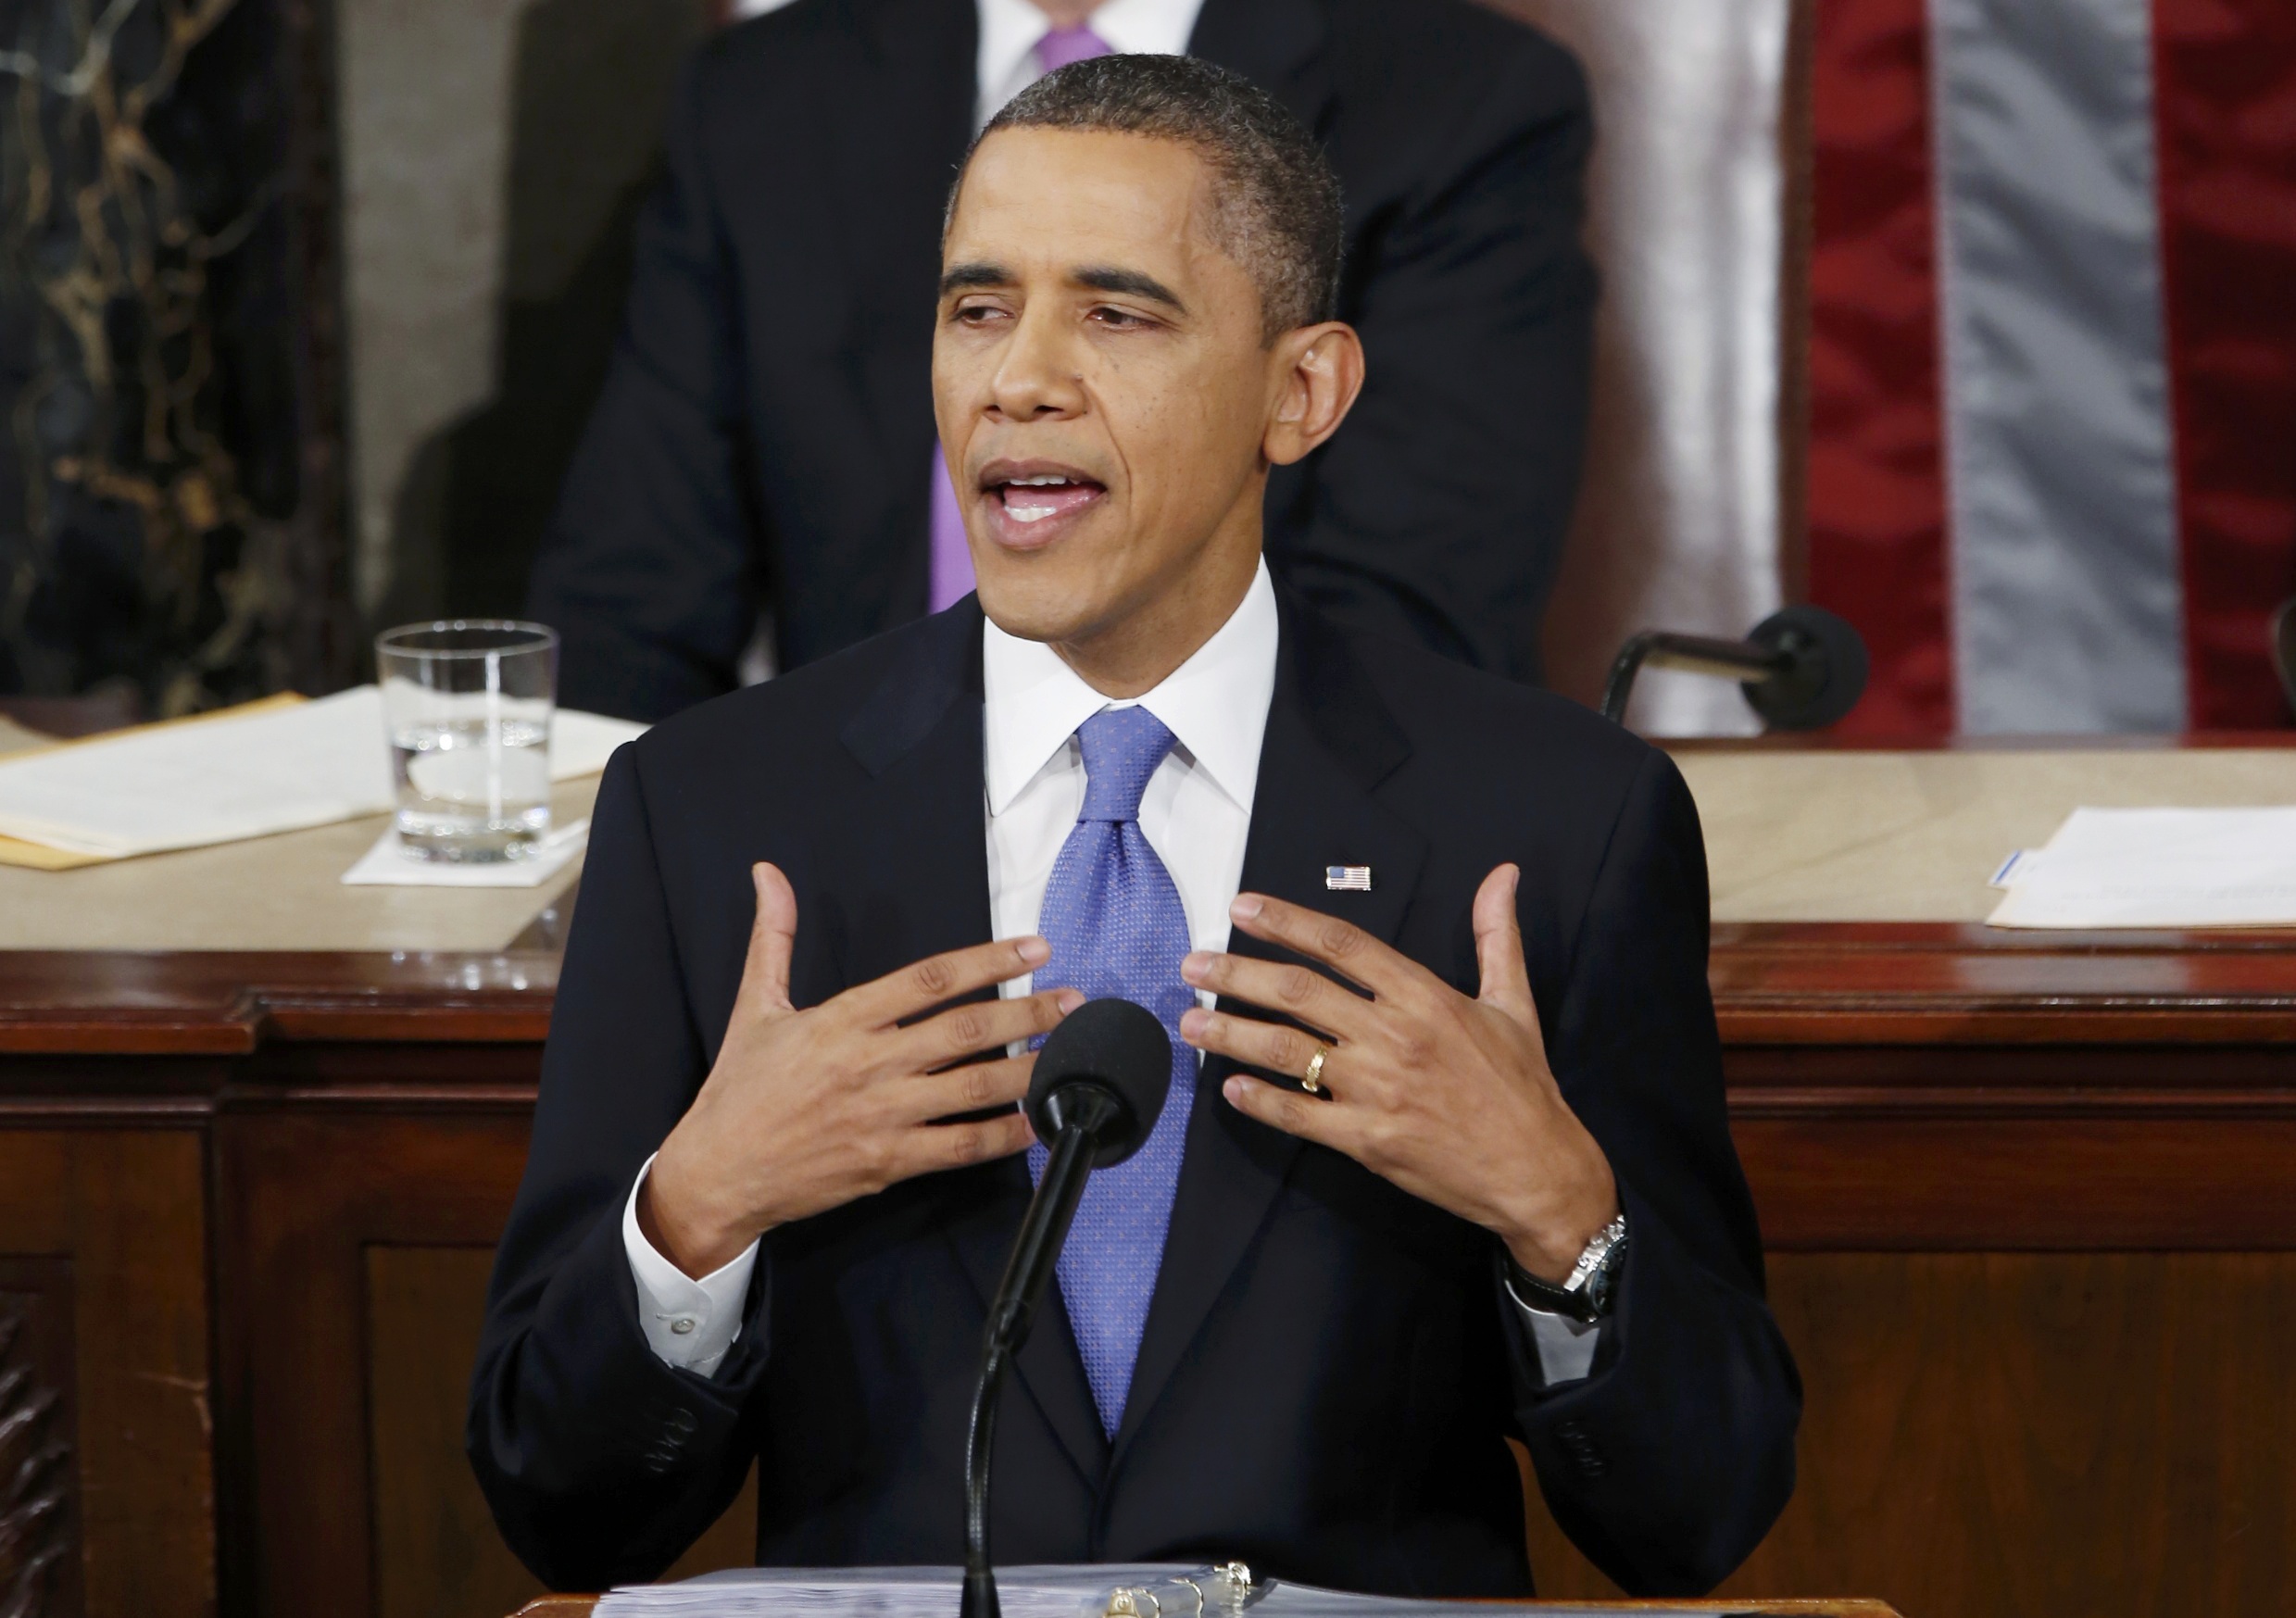 Barack Obama delivers his speech on Capitol Hill, where he called for unity to reignite the US economy. Photo: Reuters